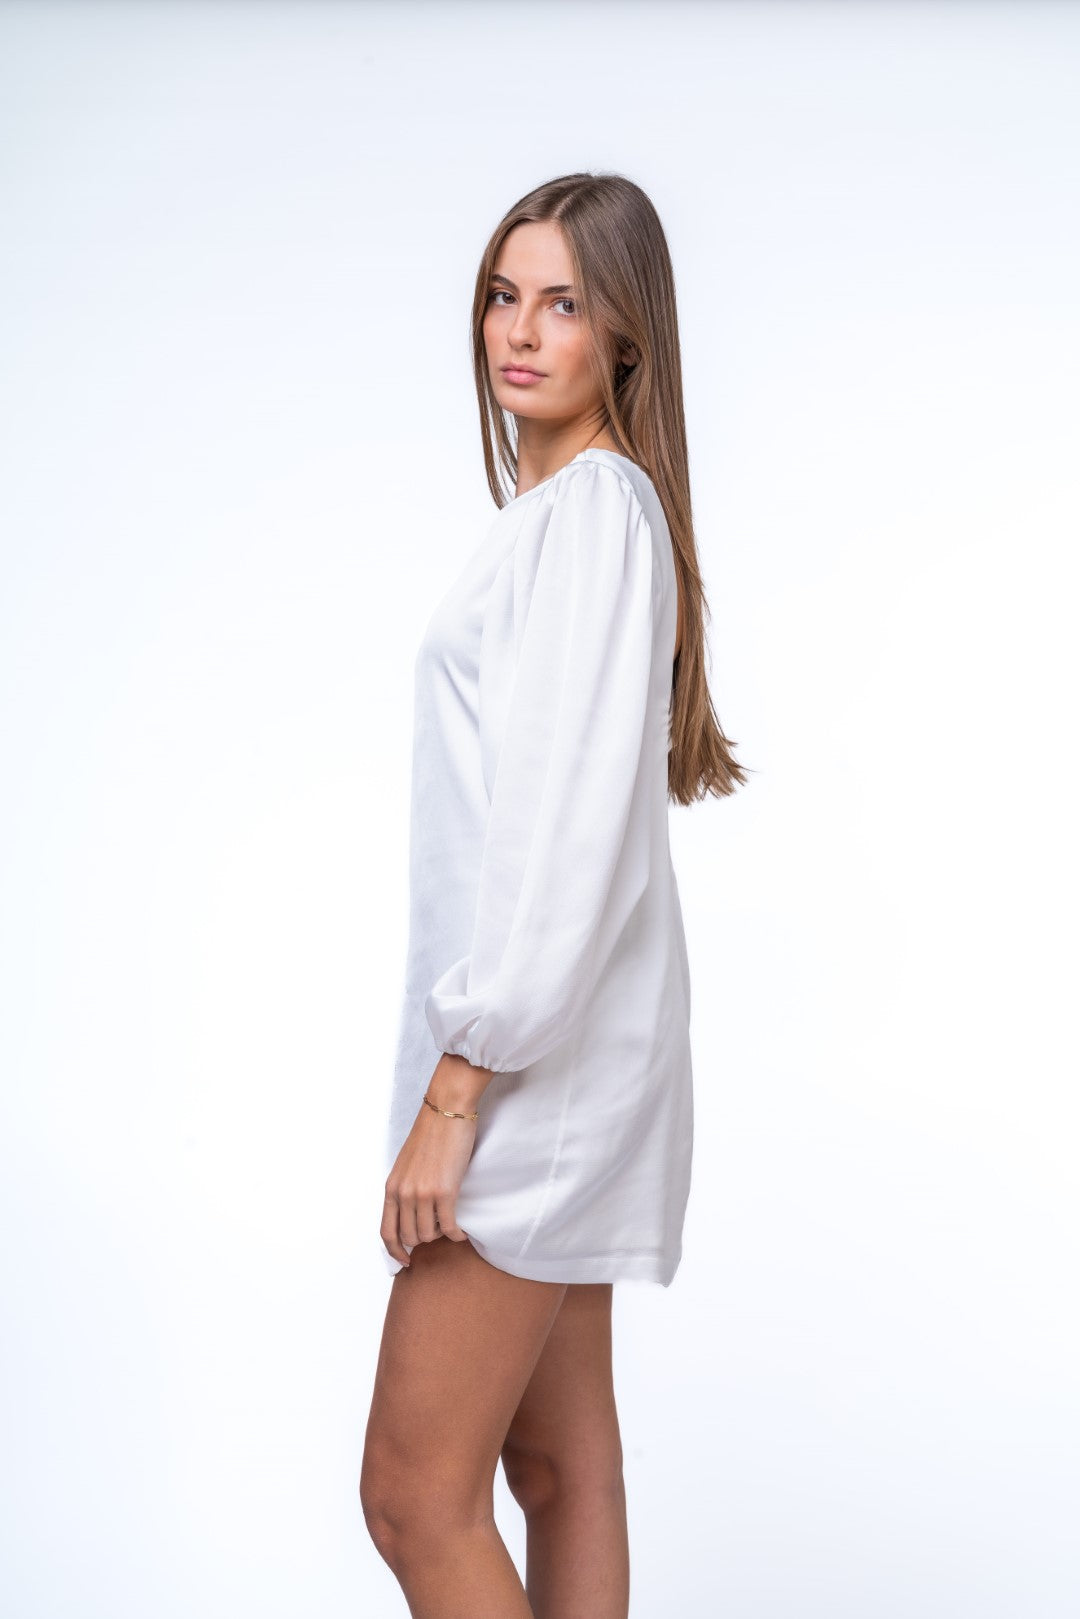 Mini Dress with Voluminous Sleeves and Open Back Details